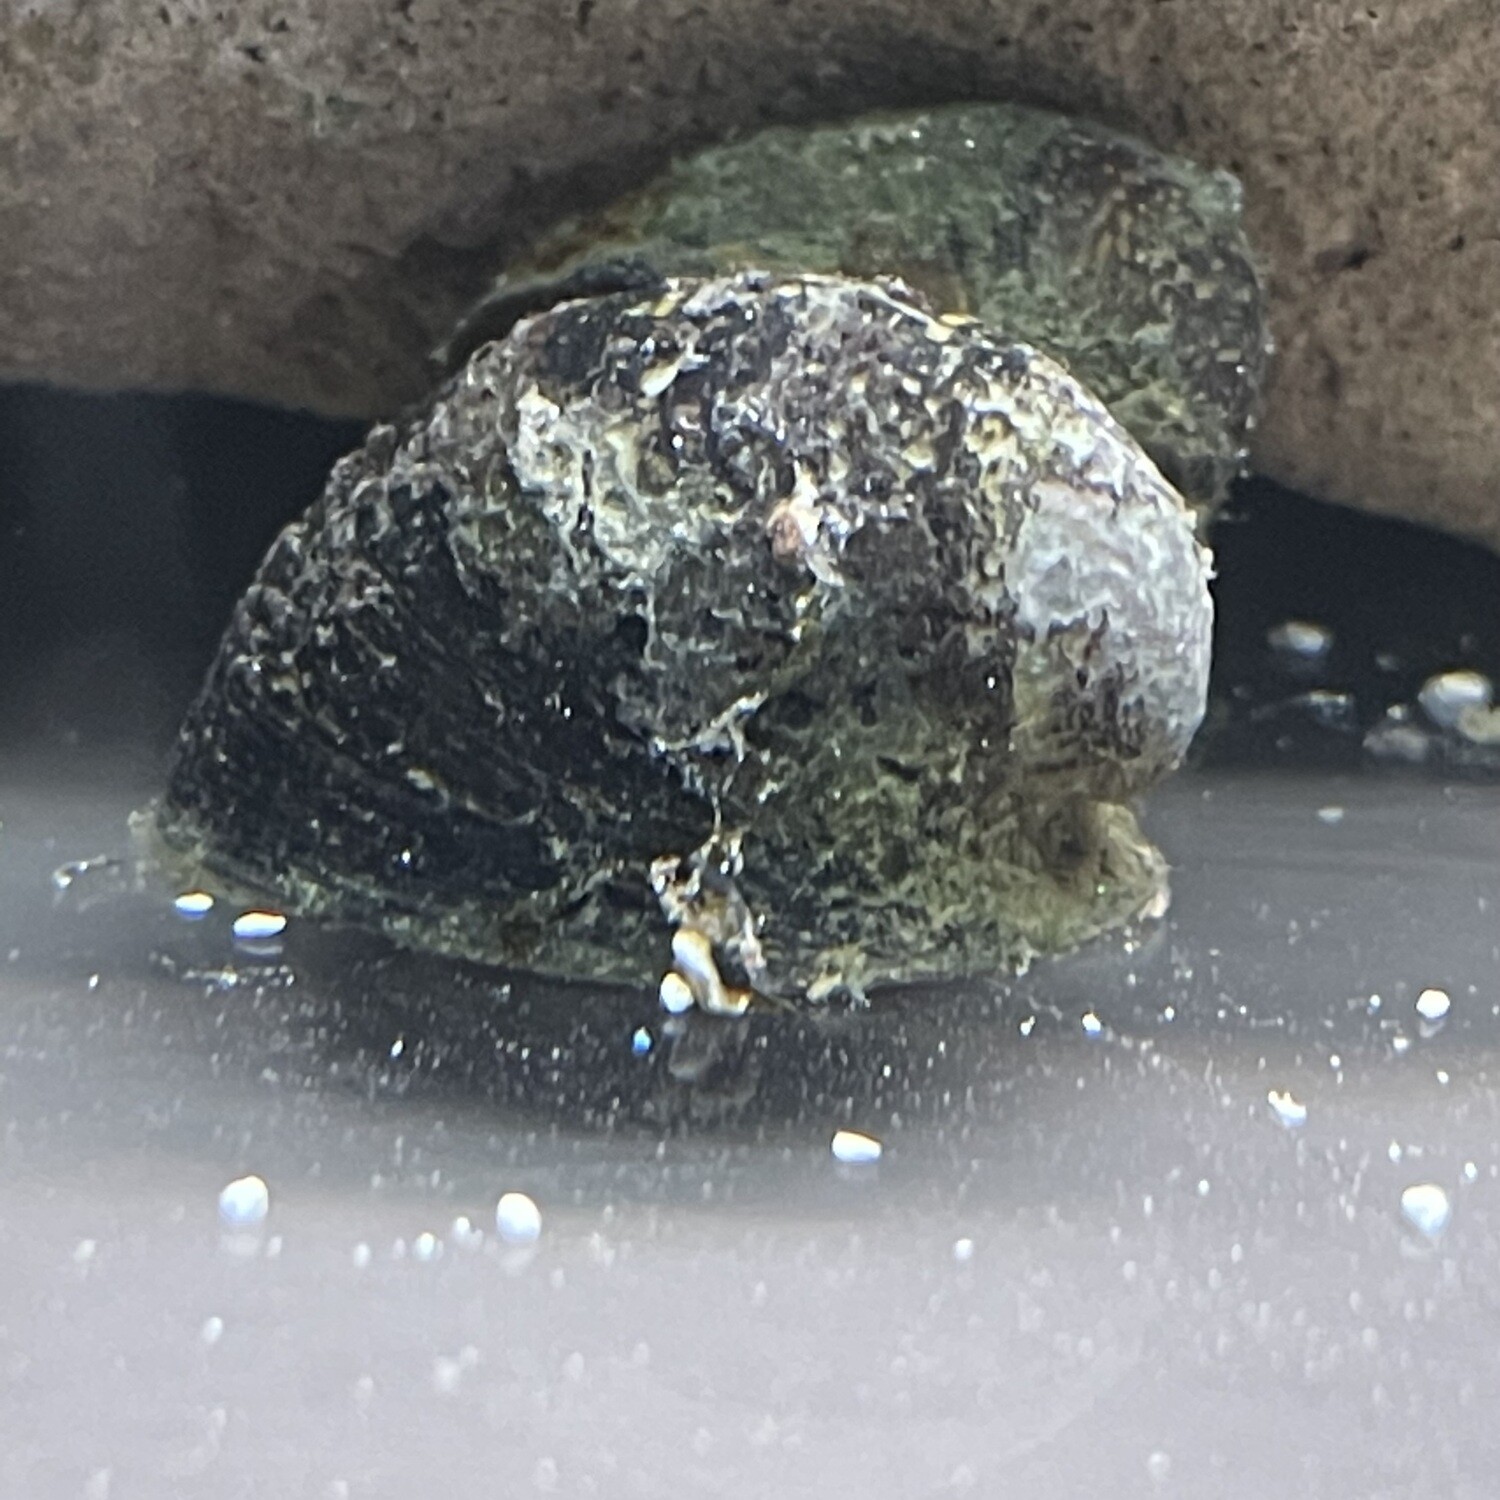 Red Lips Nerite Snail